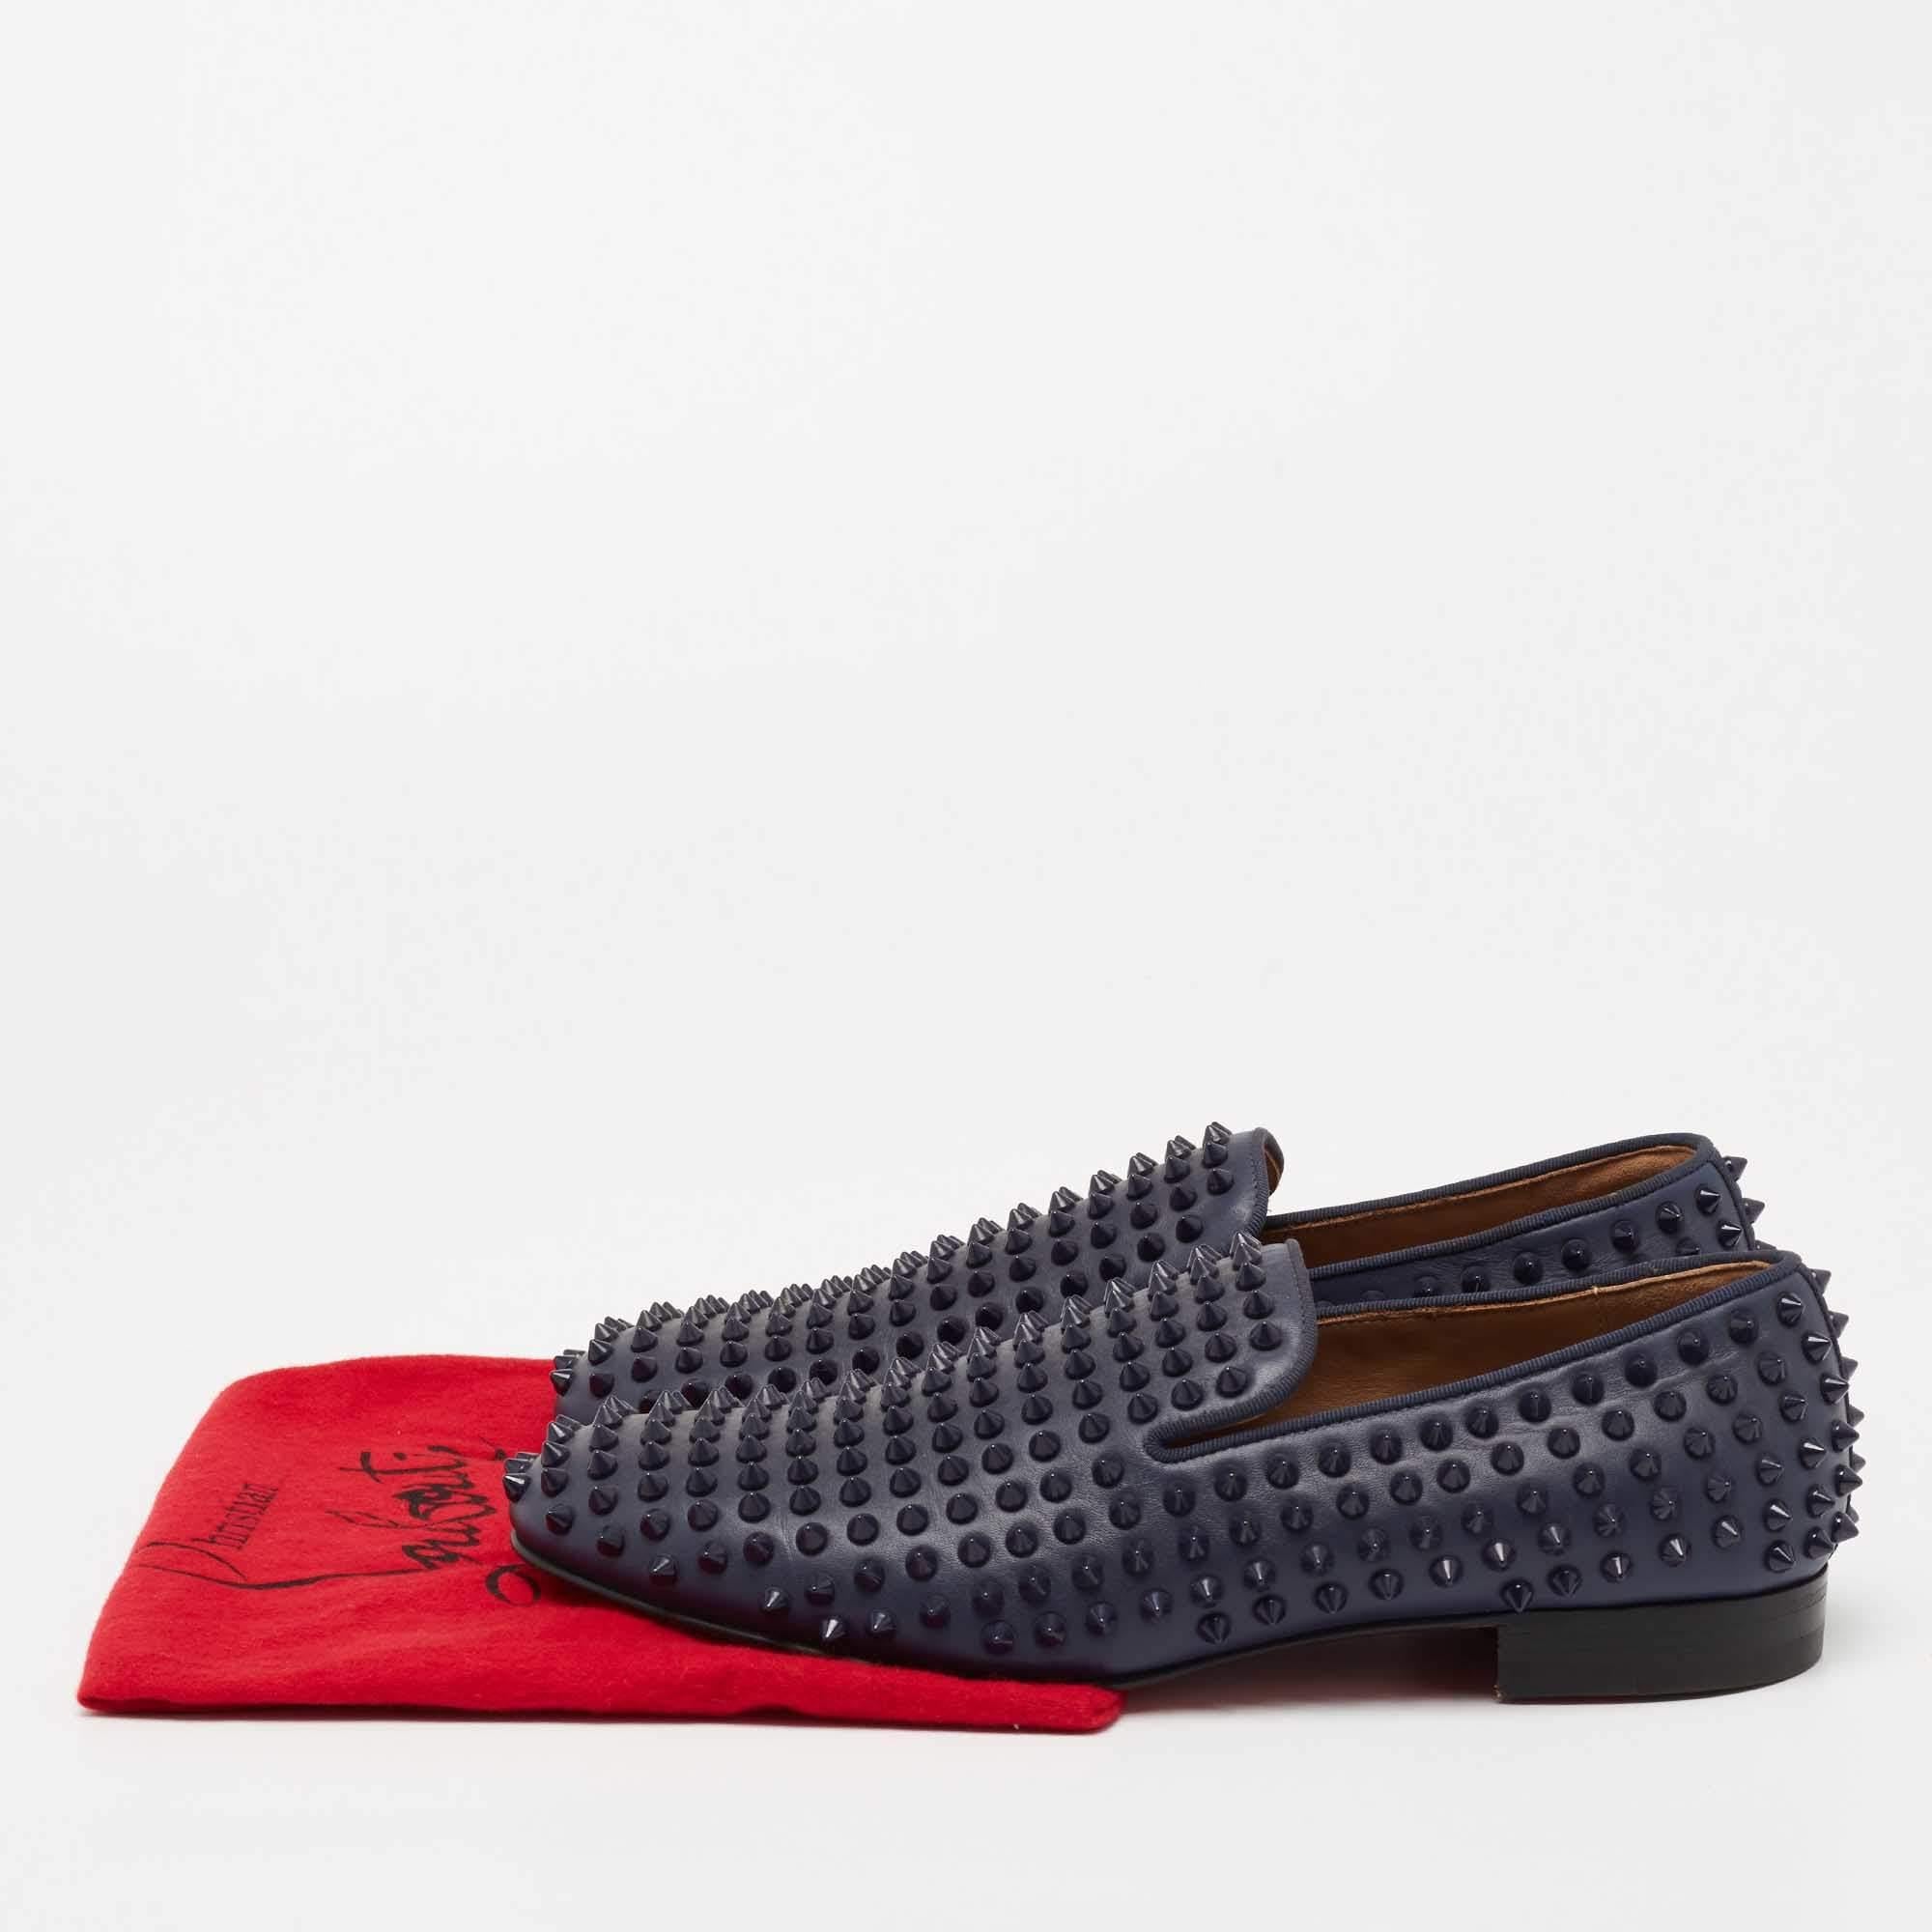 Christian Louboutin Navy Blue Leather Dandelion Spike Smoking Slippers Size 40 For Sale 3